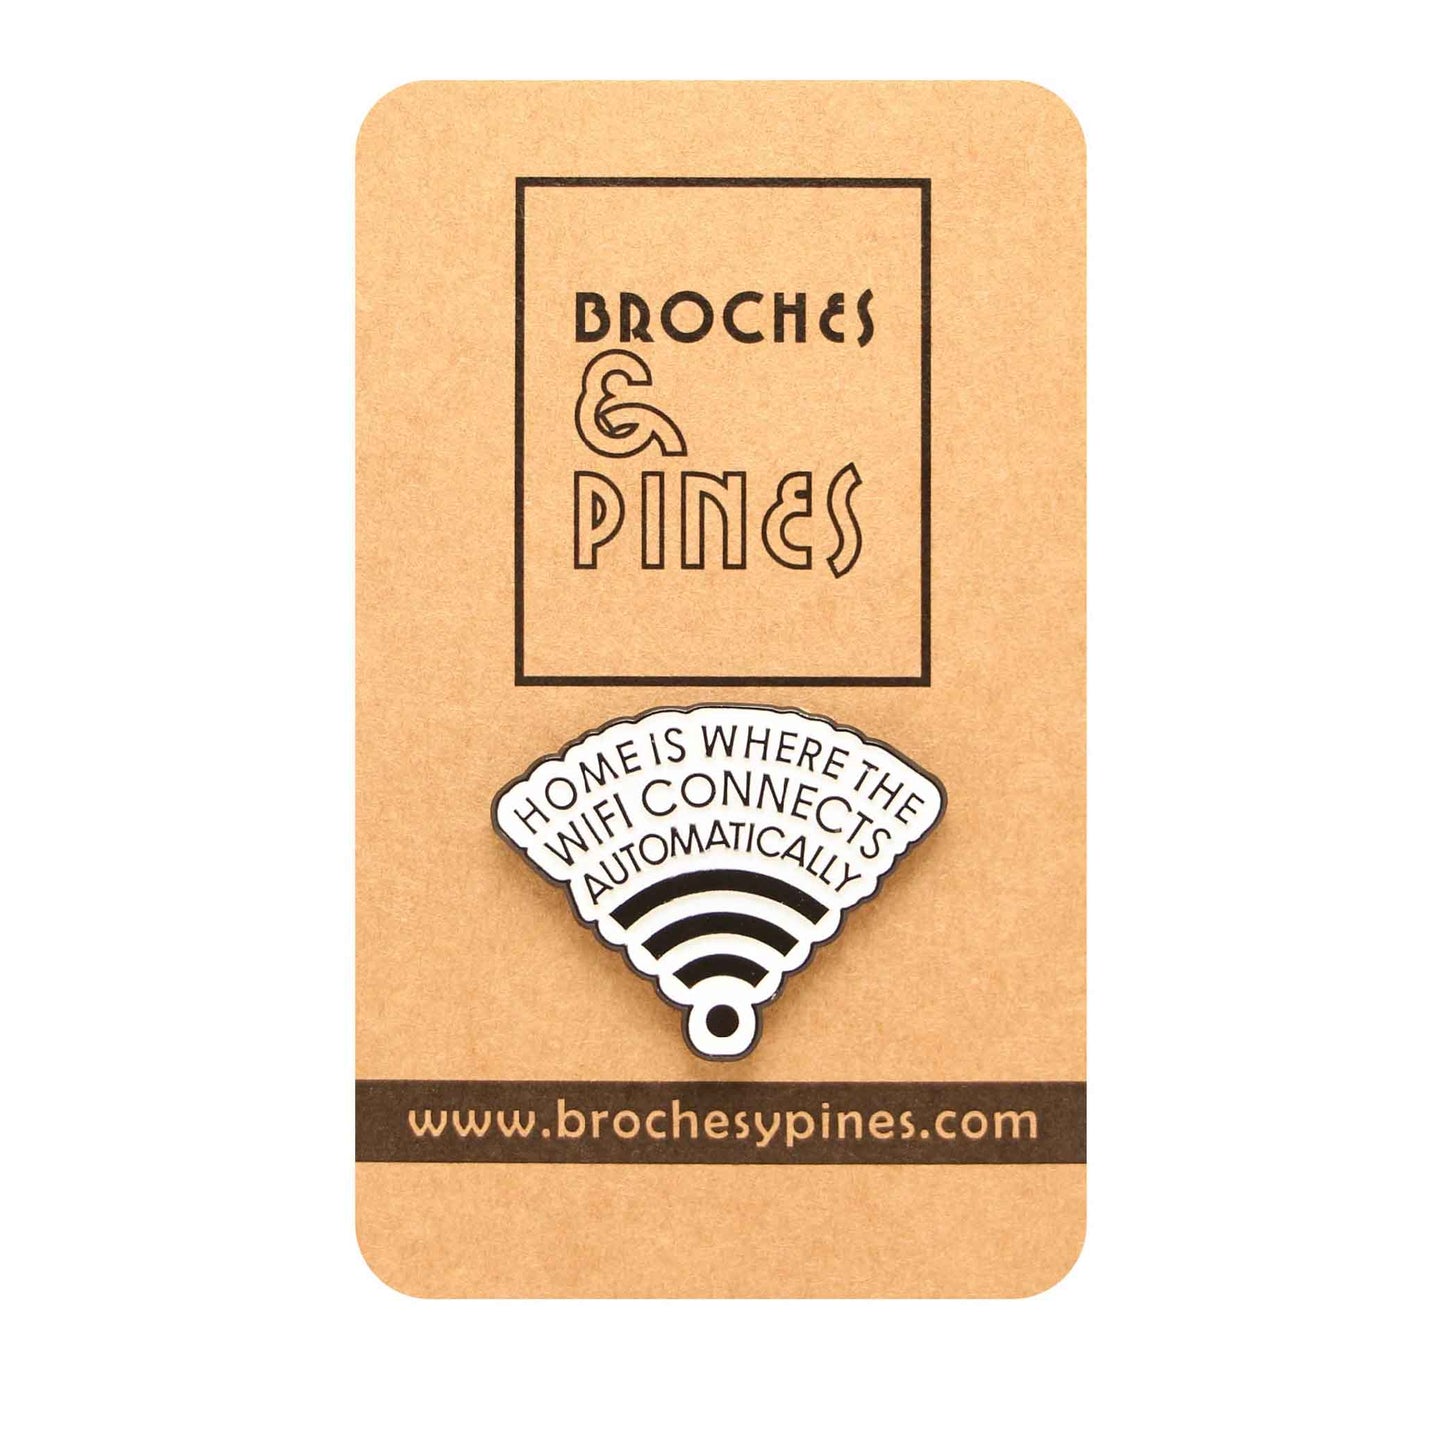 Pin "Home Is Where The Wifi Connects Automatically" - Frases